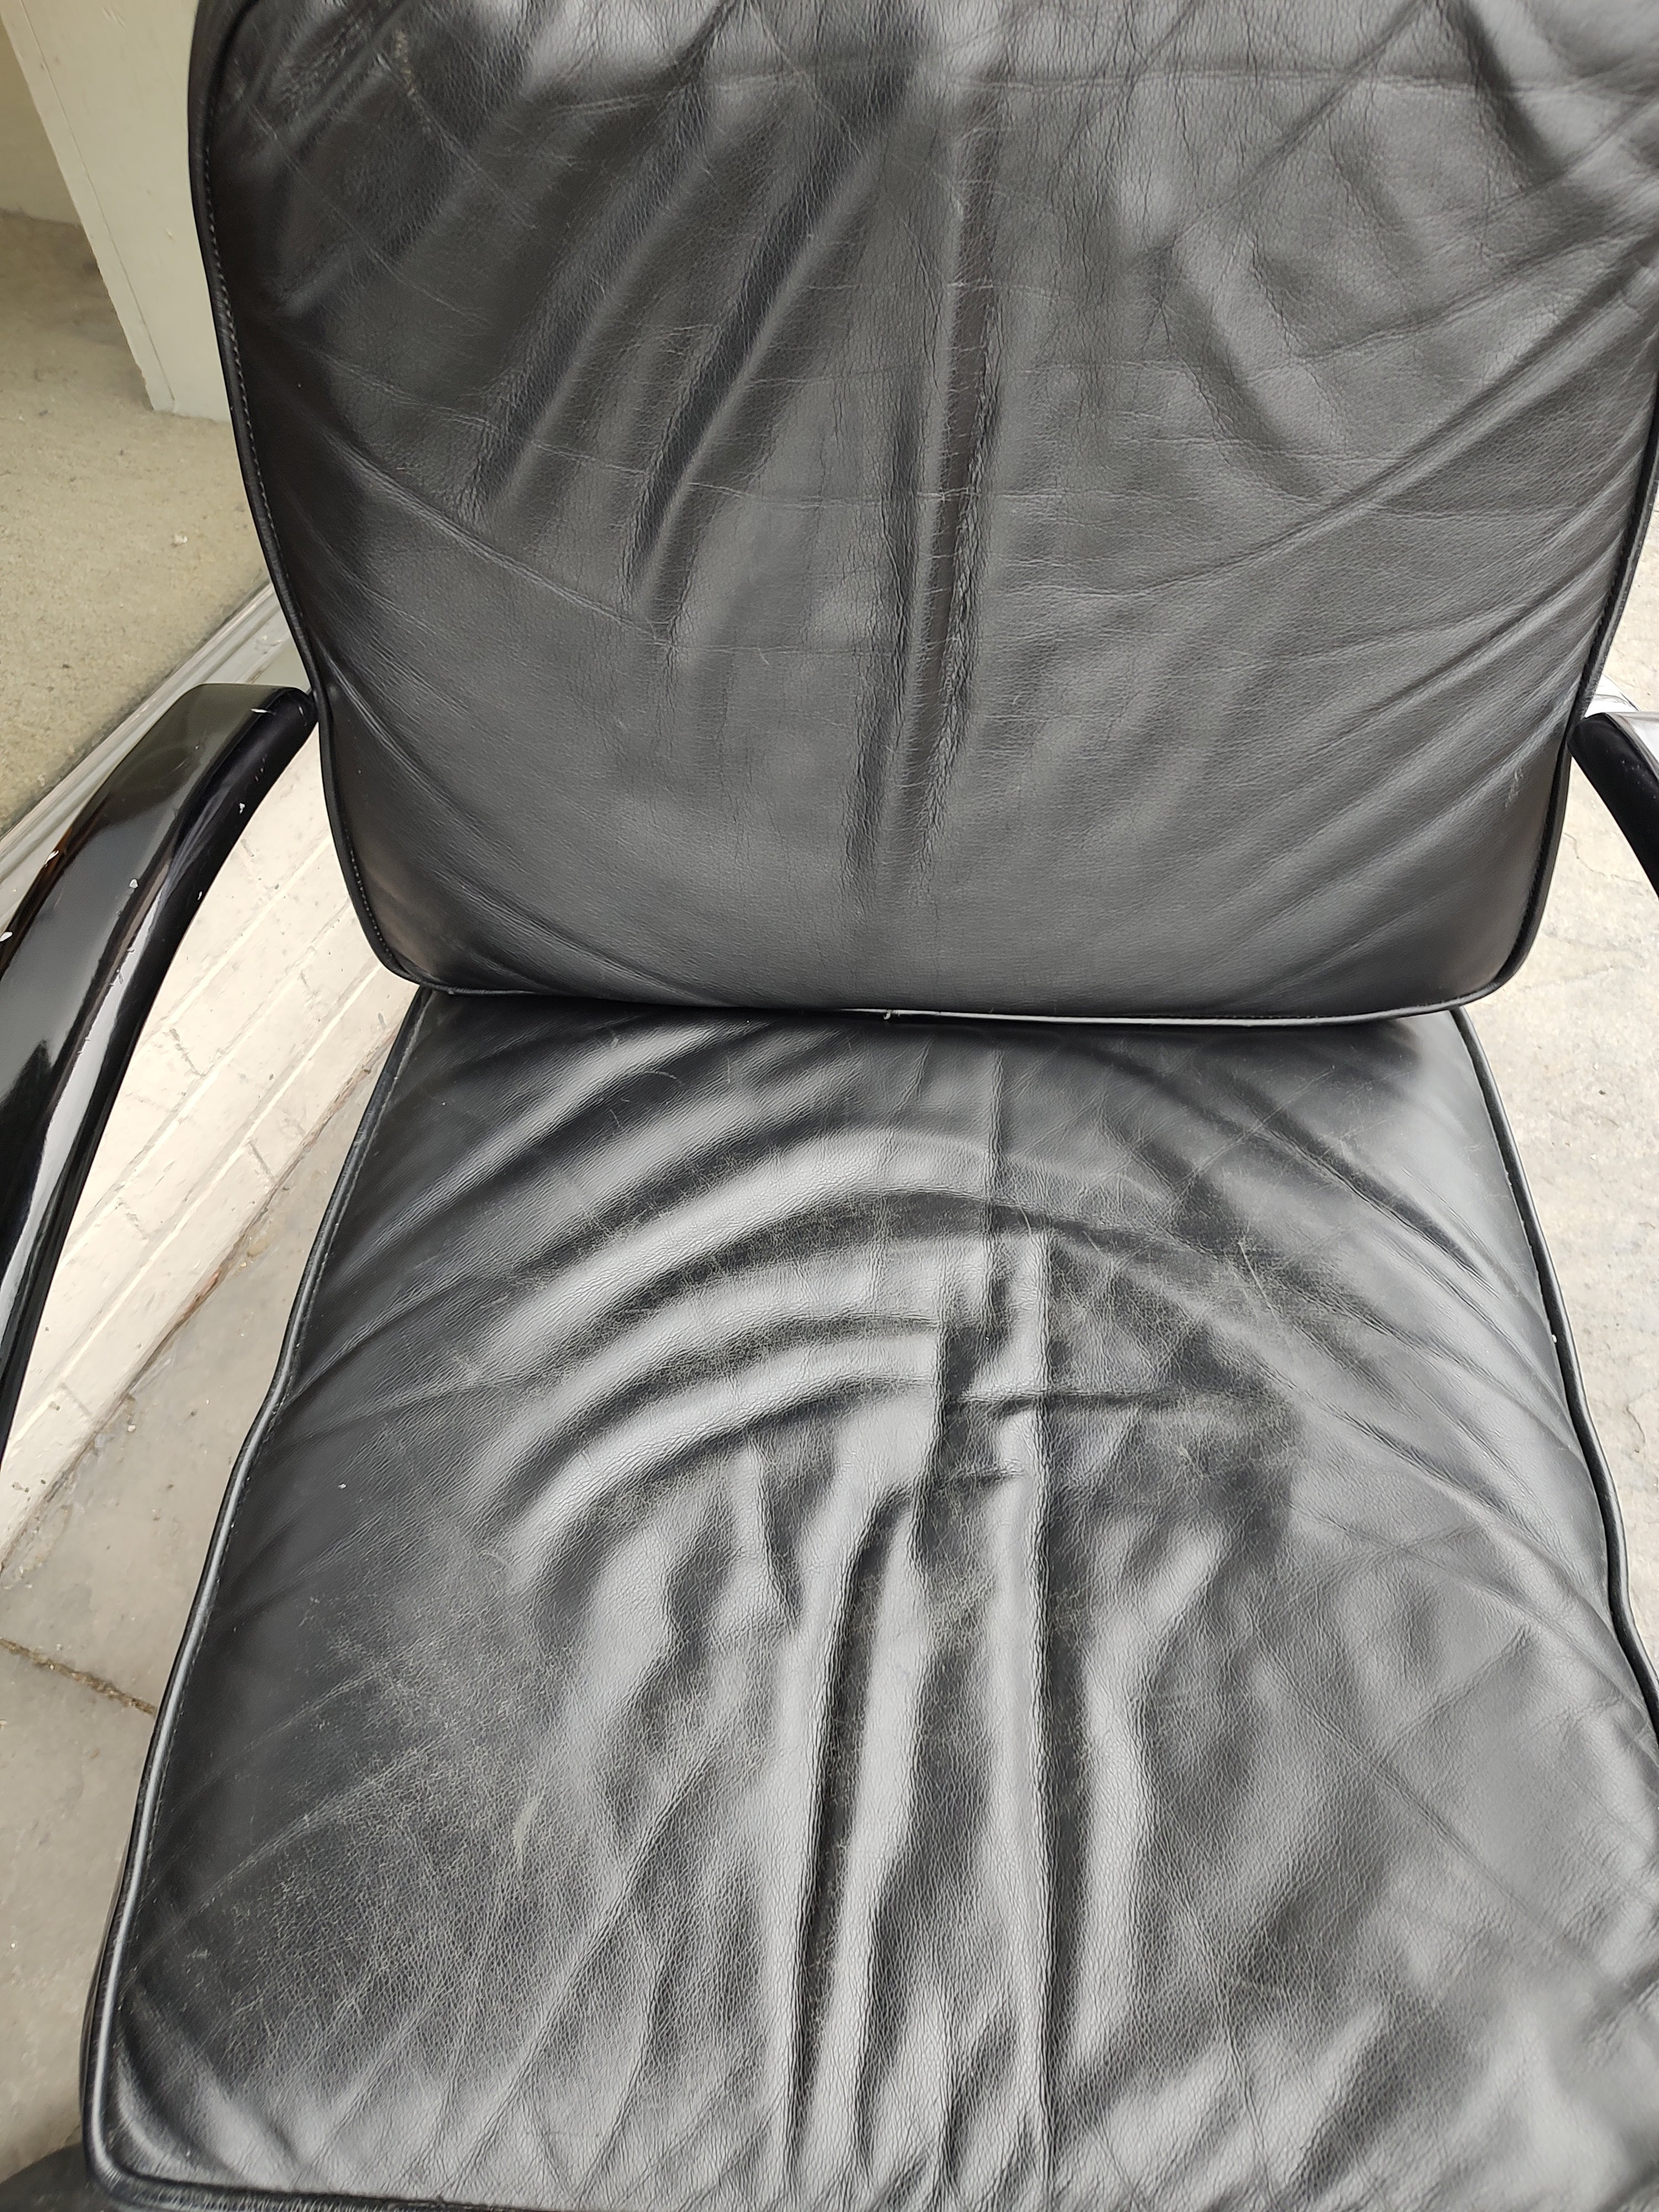 Wonderful chrome spring lounge chair by Kem Weber for Lloyd furniture. In excellent vintage condition with minimal wear. Leather cushions show some creases but no cracks or tears. Chrome is excellent.